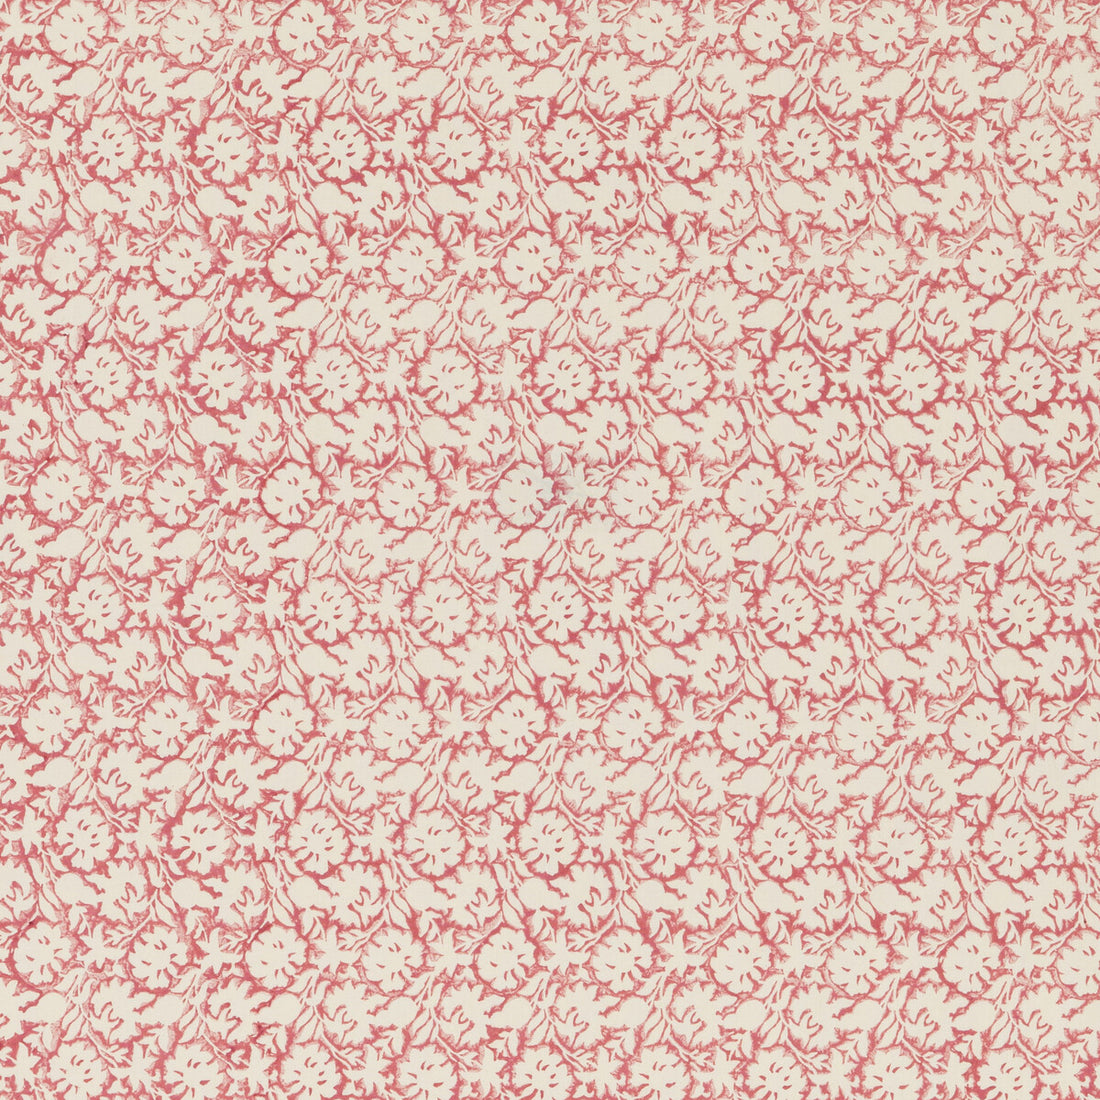 Flower Press fabric in fuchsia color - pattern PP50480.6.0 - by Baker Lifestyle in the Block Party collection